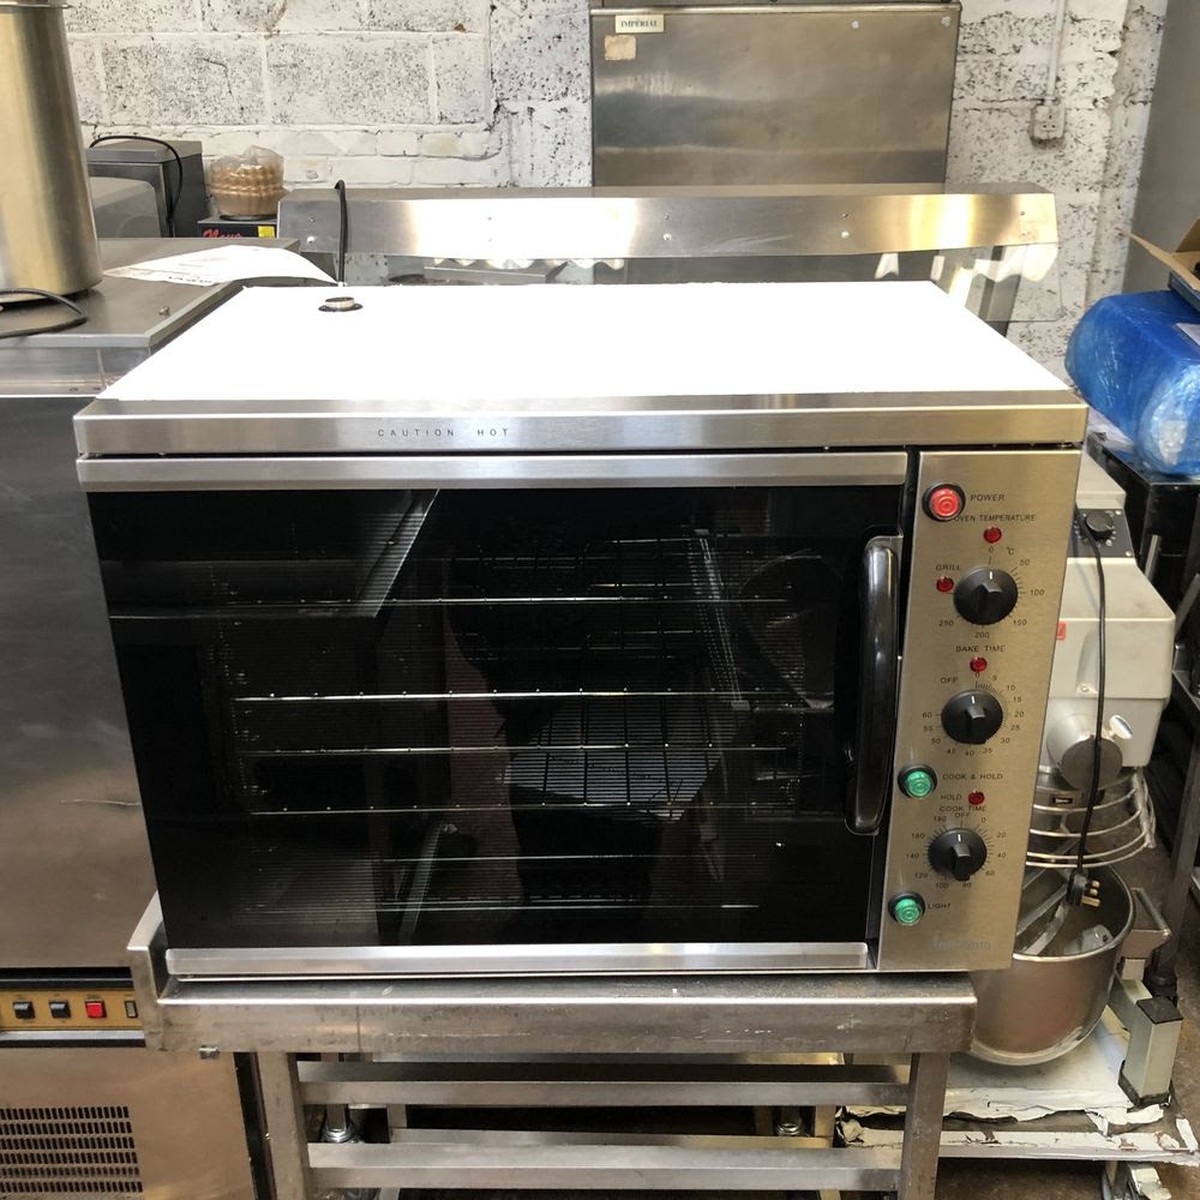 electric range convection oven